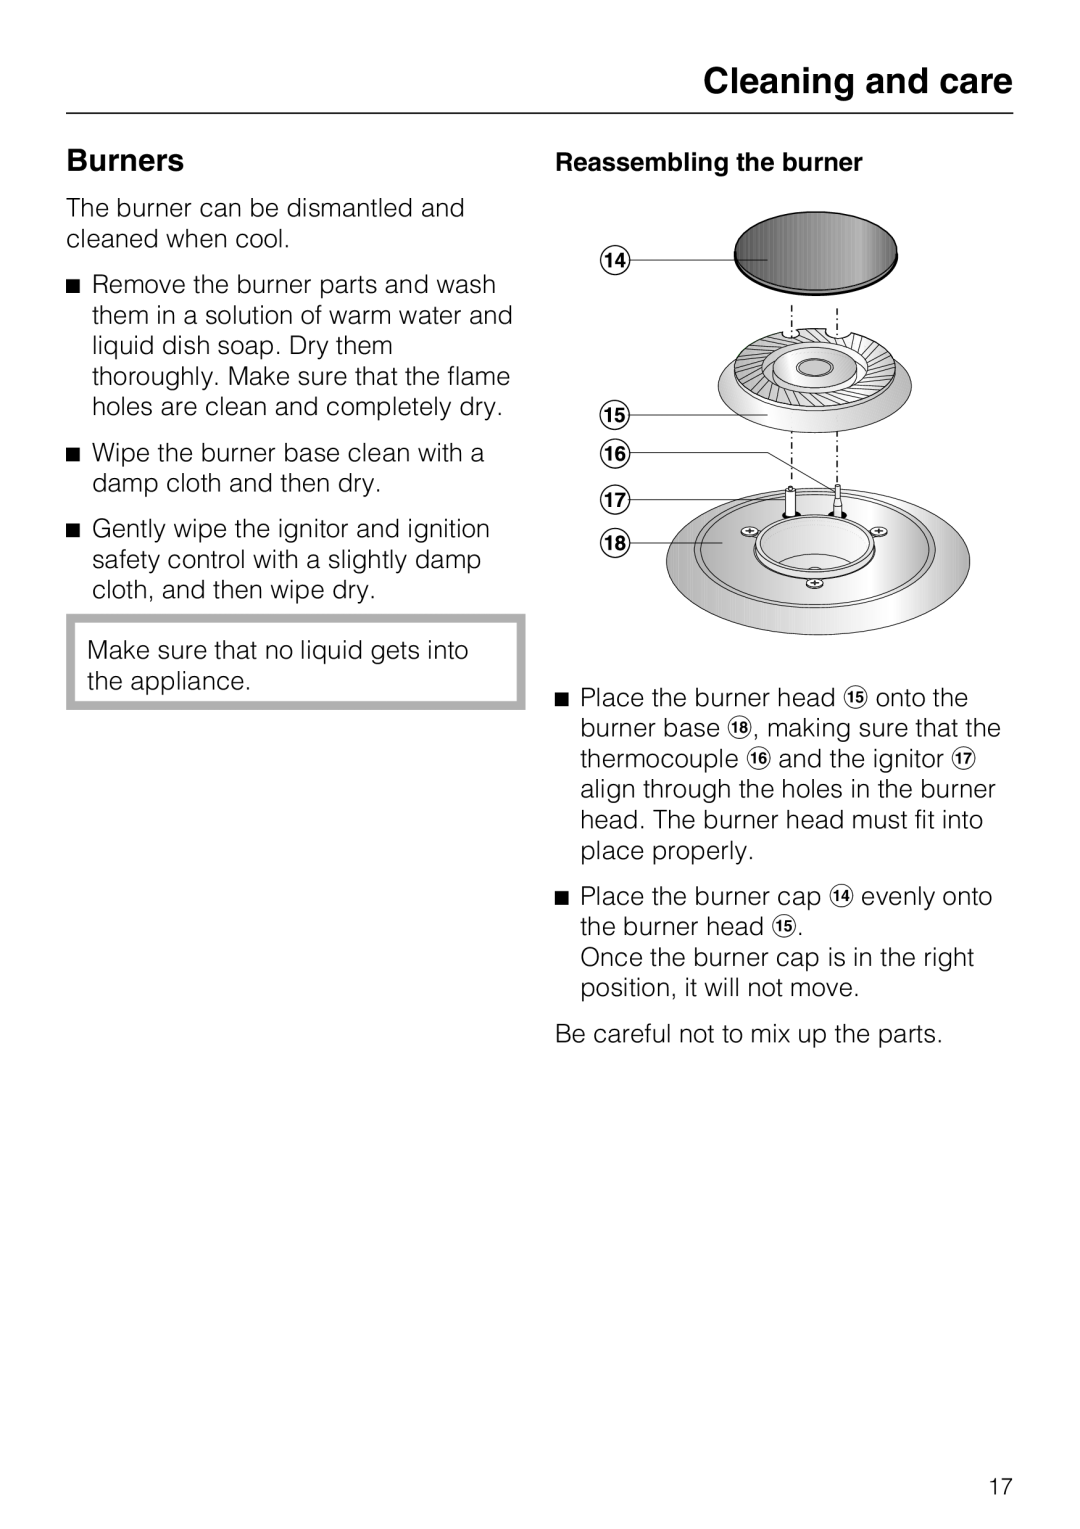 Miele CS 1012 installation instructions Burners, Cleaning and care, Reassembling the burner 